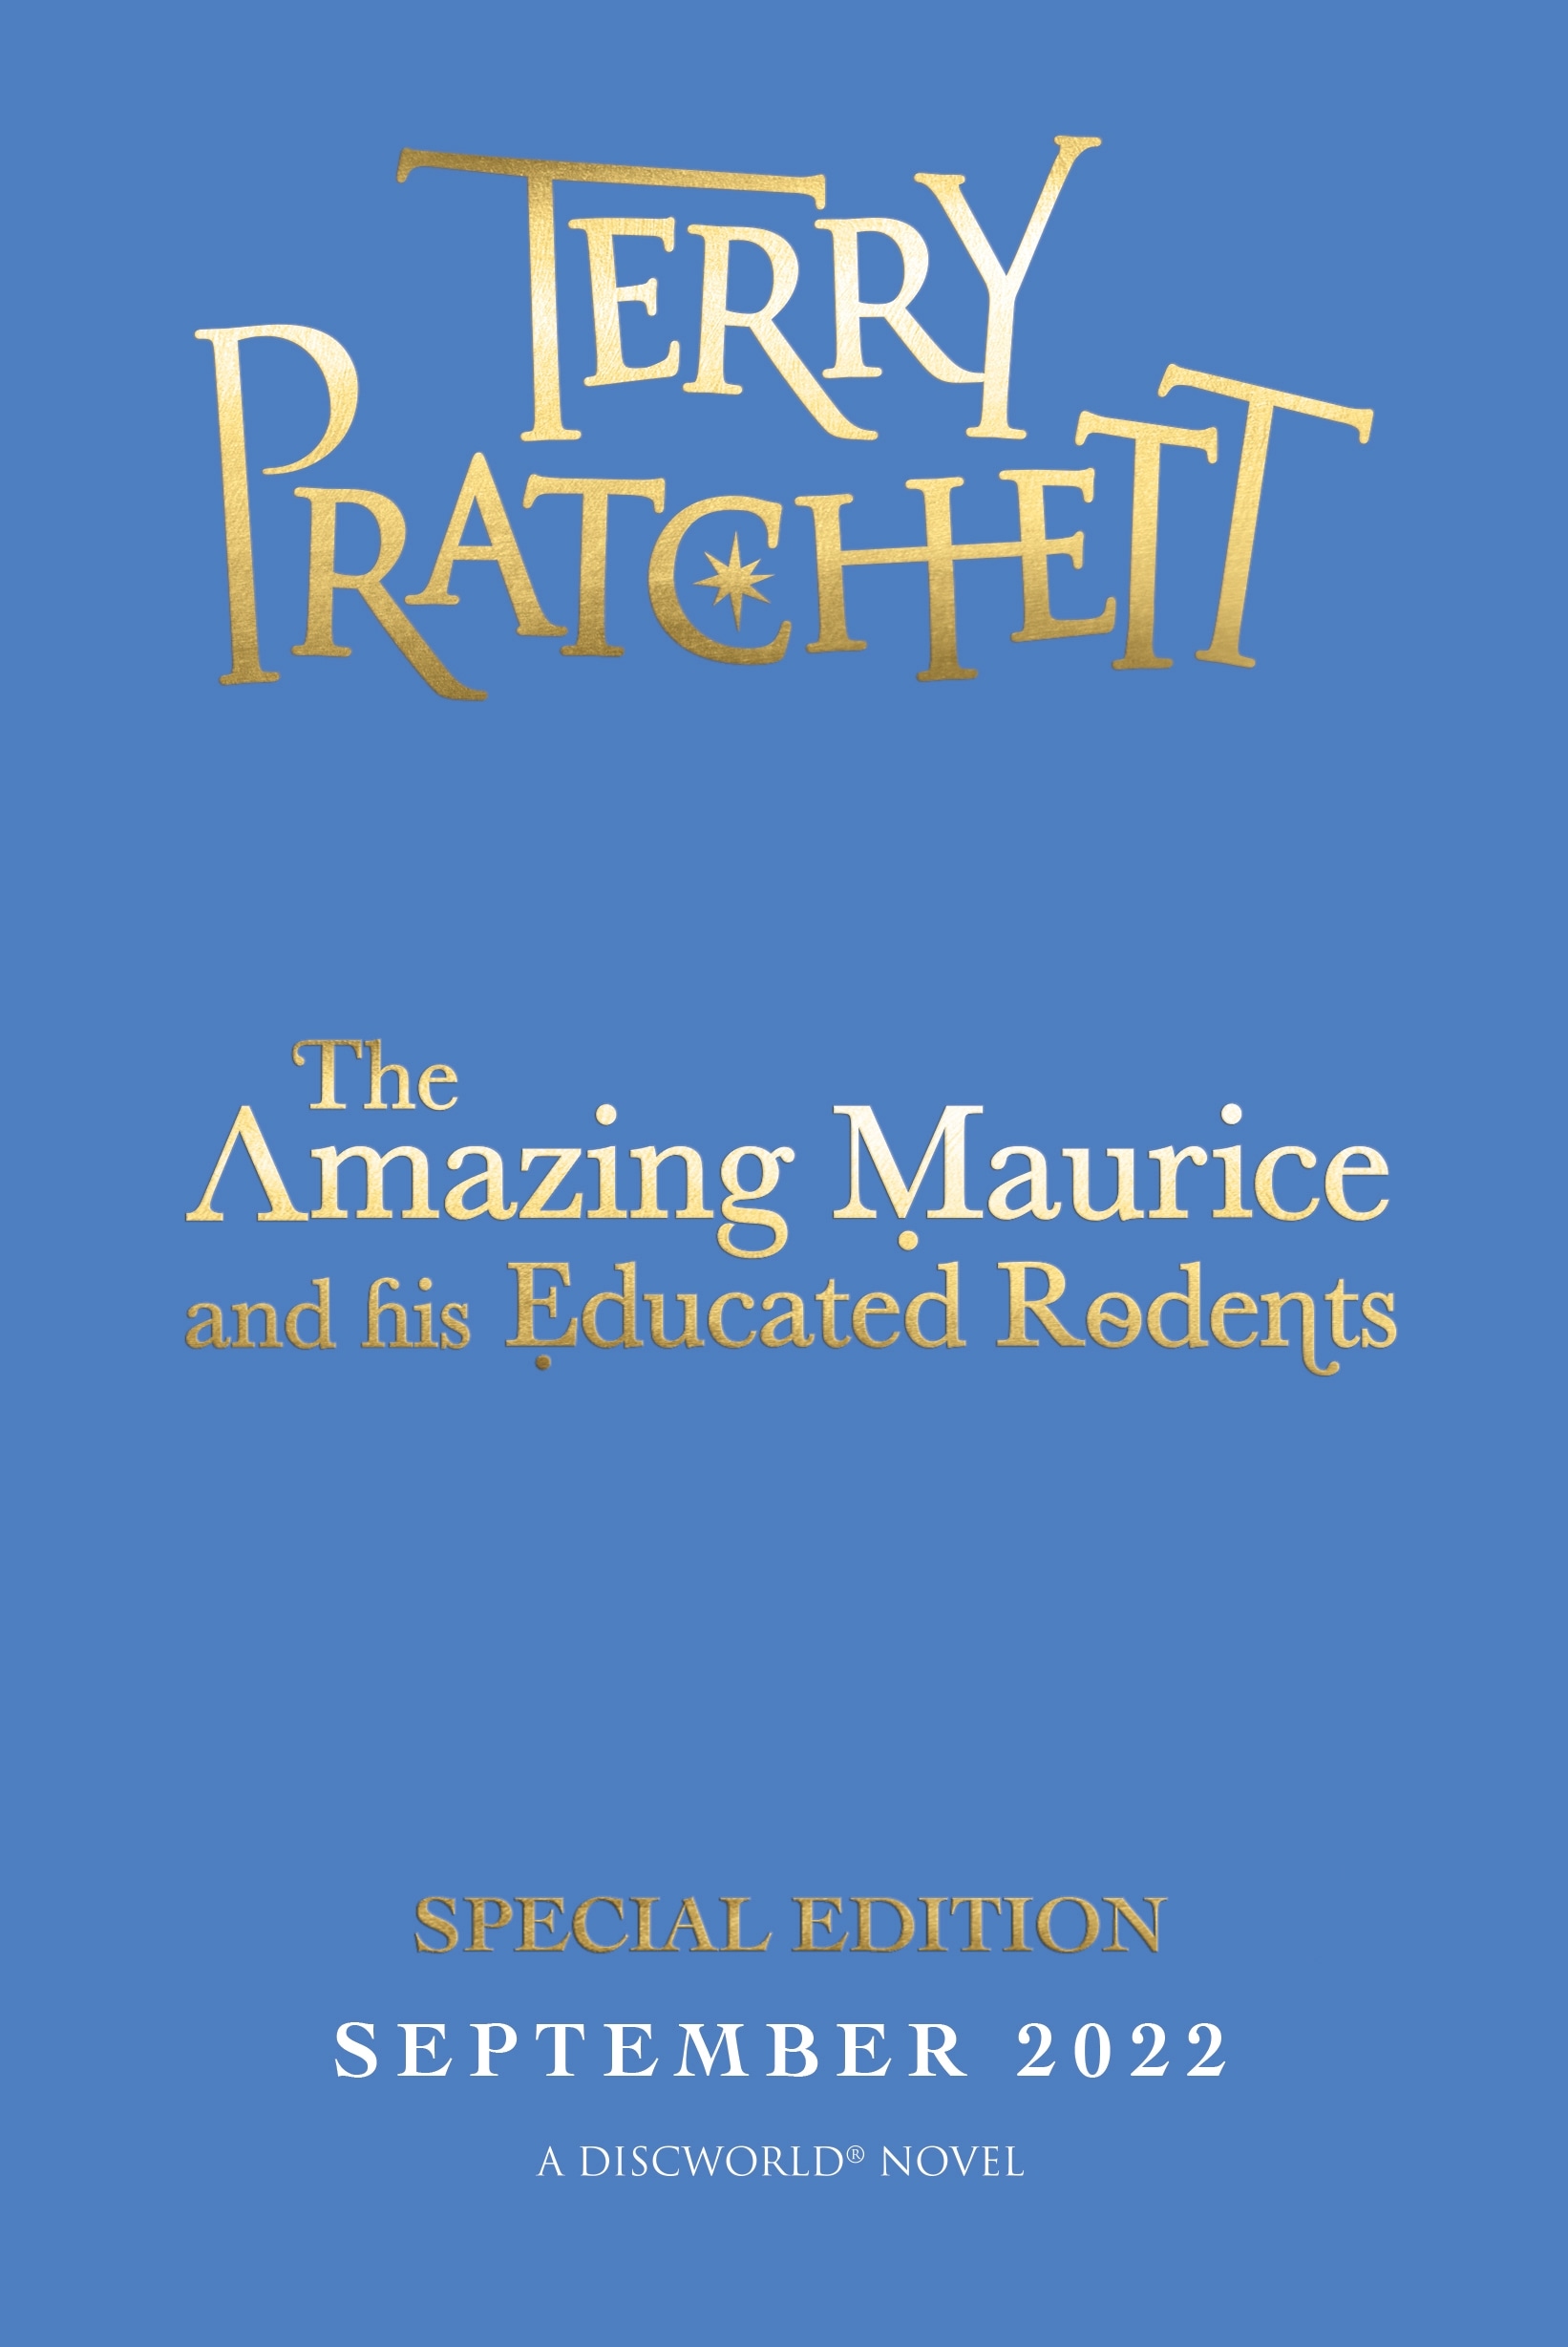 Book “The Amazing Maurice and his Educated Rodents” by Terry Pratchett — September 1, 2022